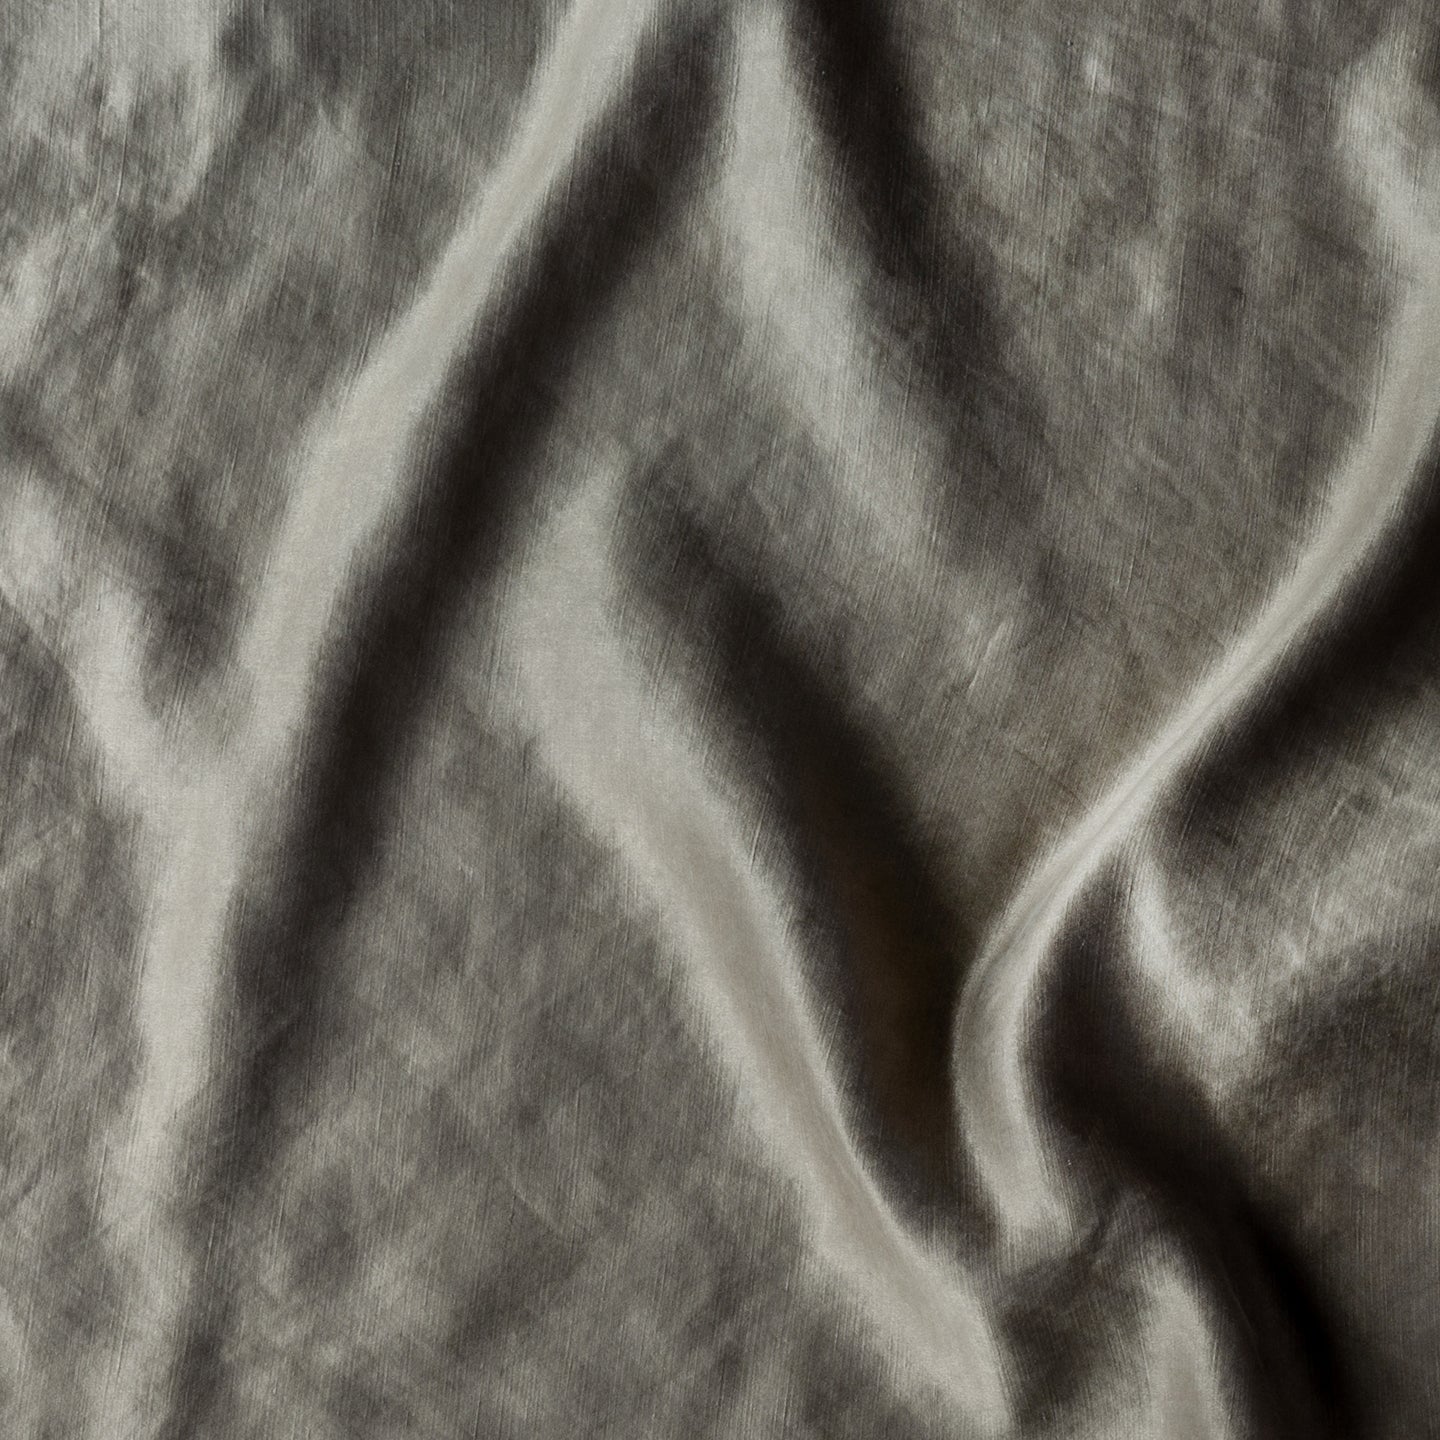 Moonlight: Close-up of silk charmeuse in moonlight, a saturated, cool, mid-dark grey tone. 